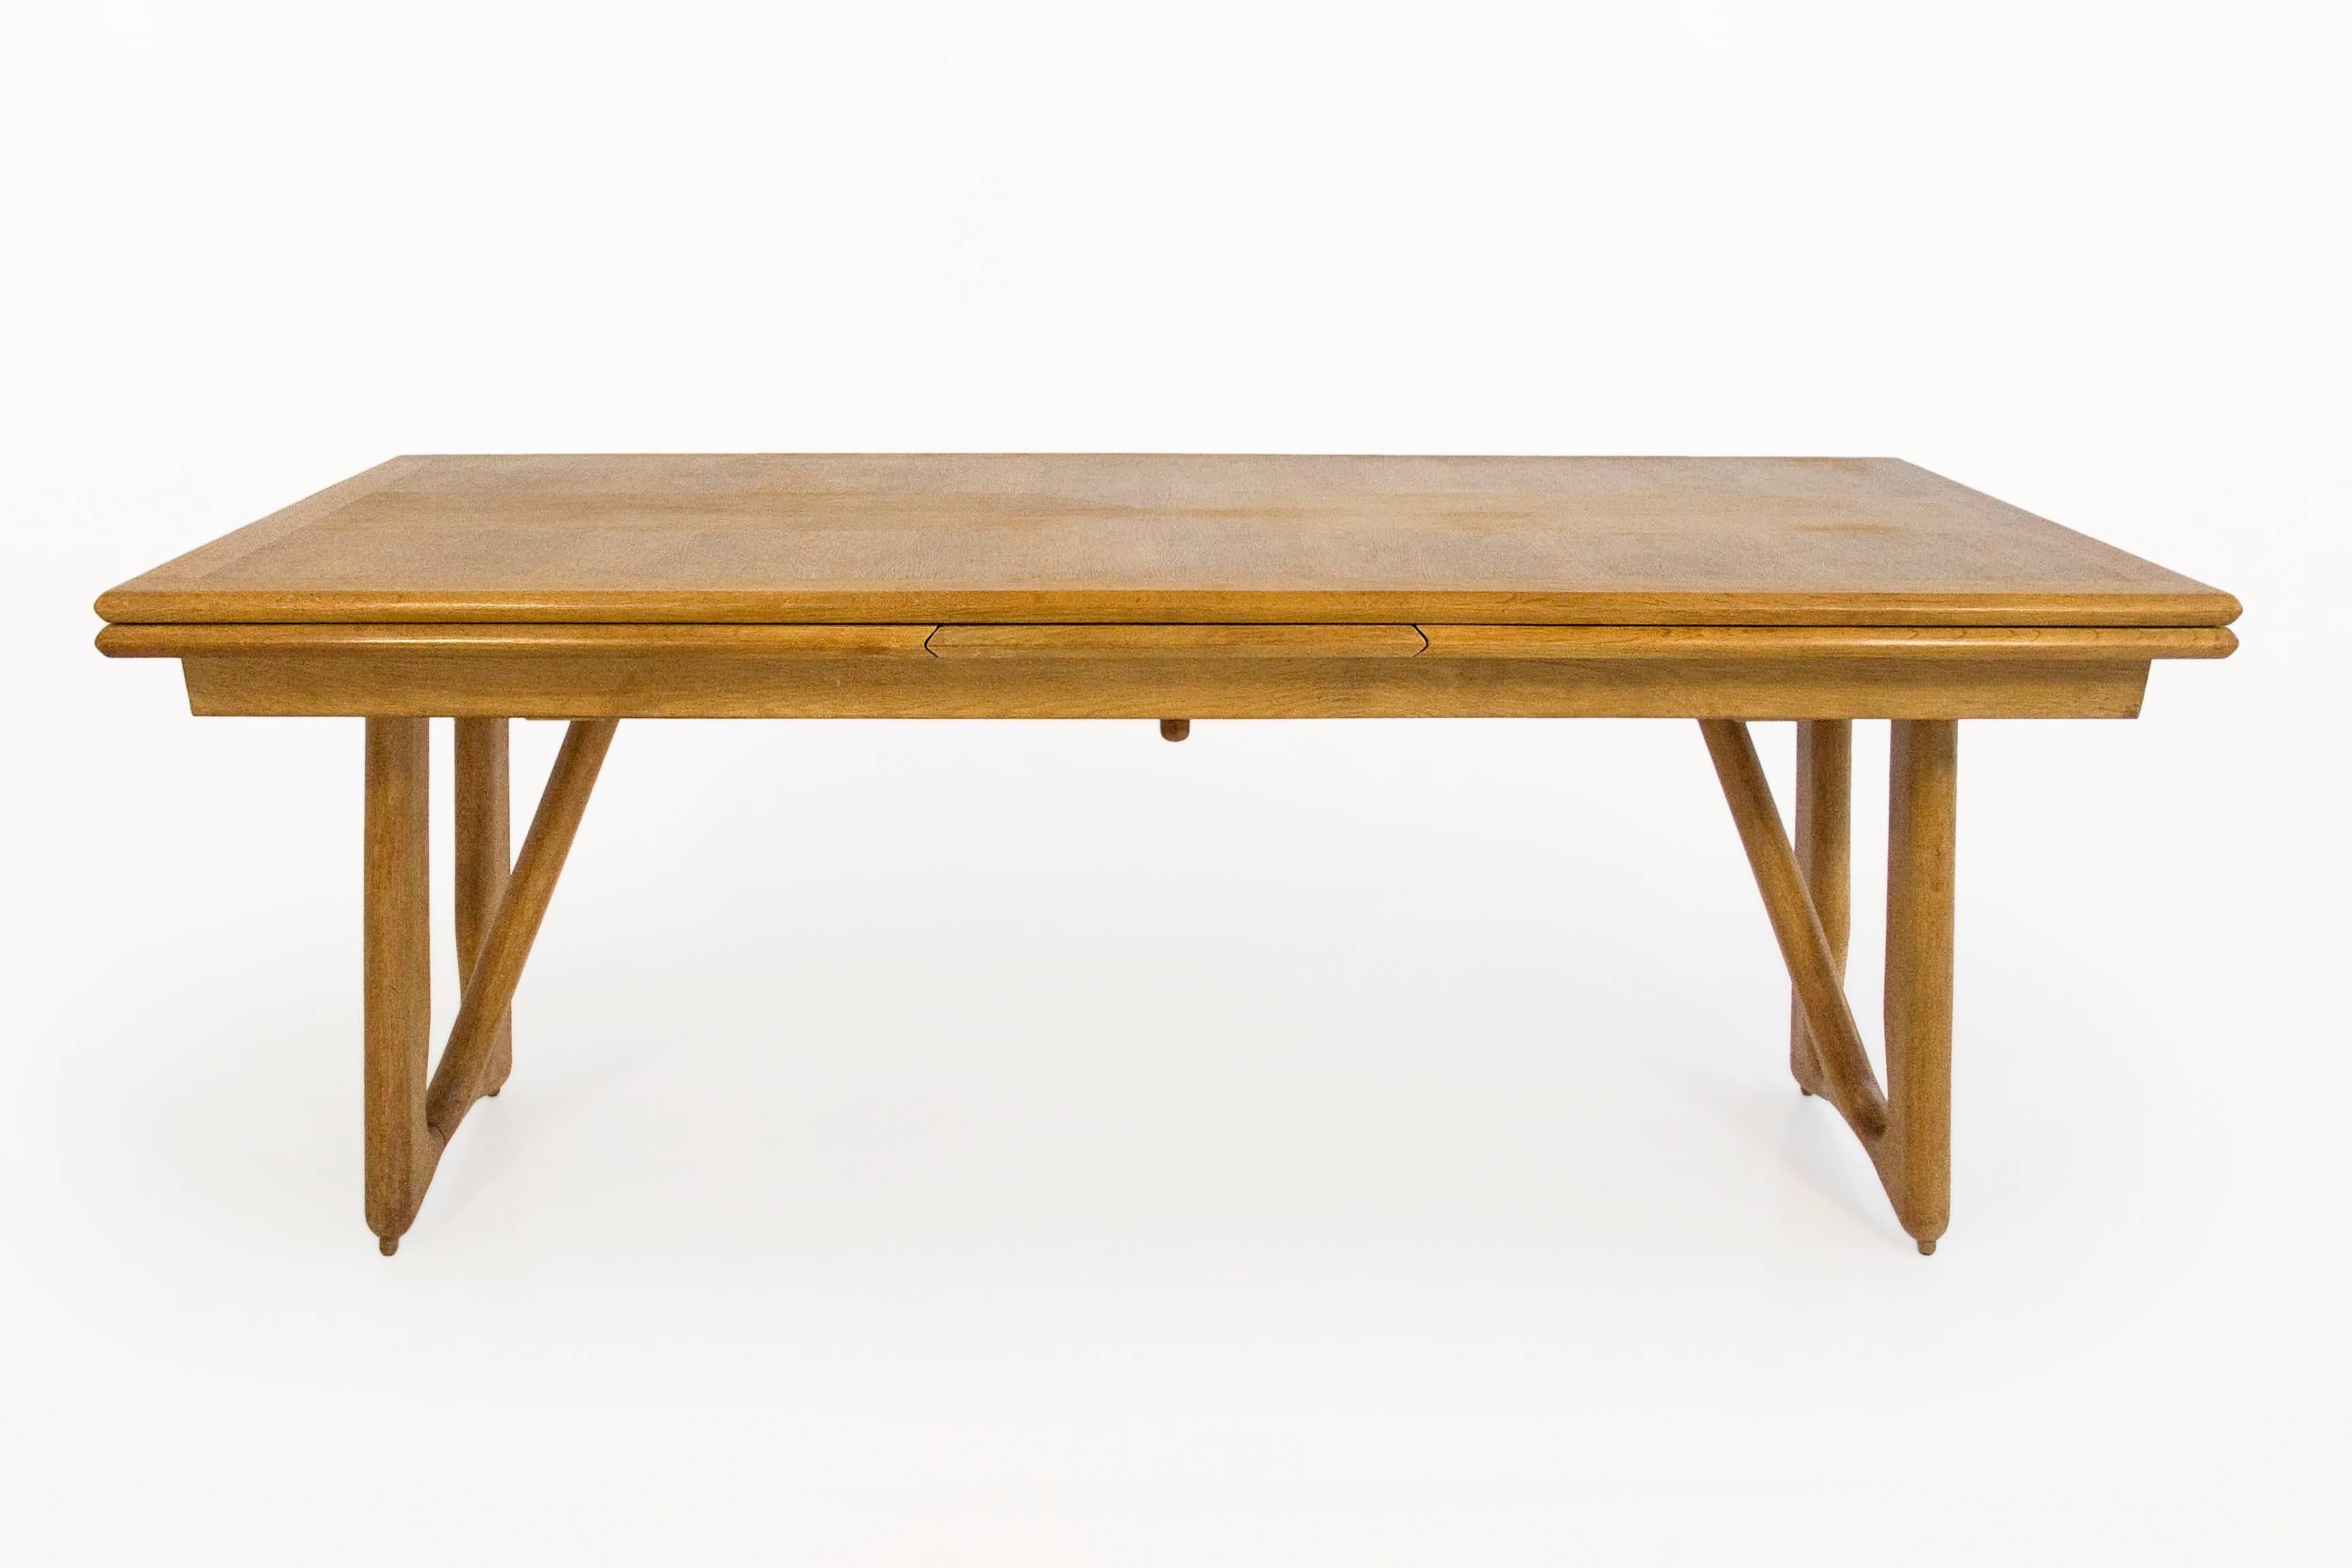 Guillerme et Chambron oak leaf extension dining table. 
Beautiful oak dining table with integrated extensions
Beautiful inlaid tabletop design
Beautiful table leg design
circa 1960, France
Very good vintage condition.